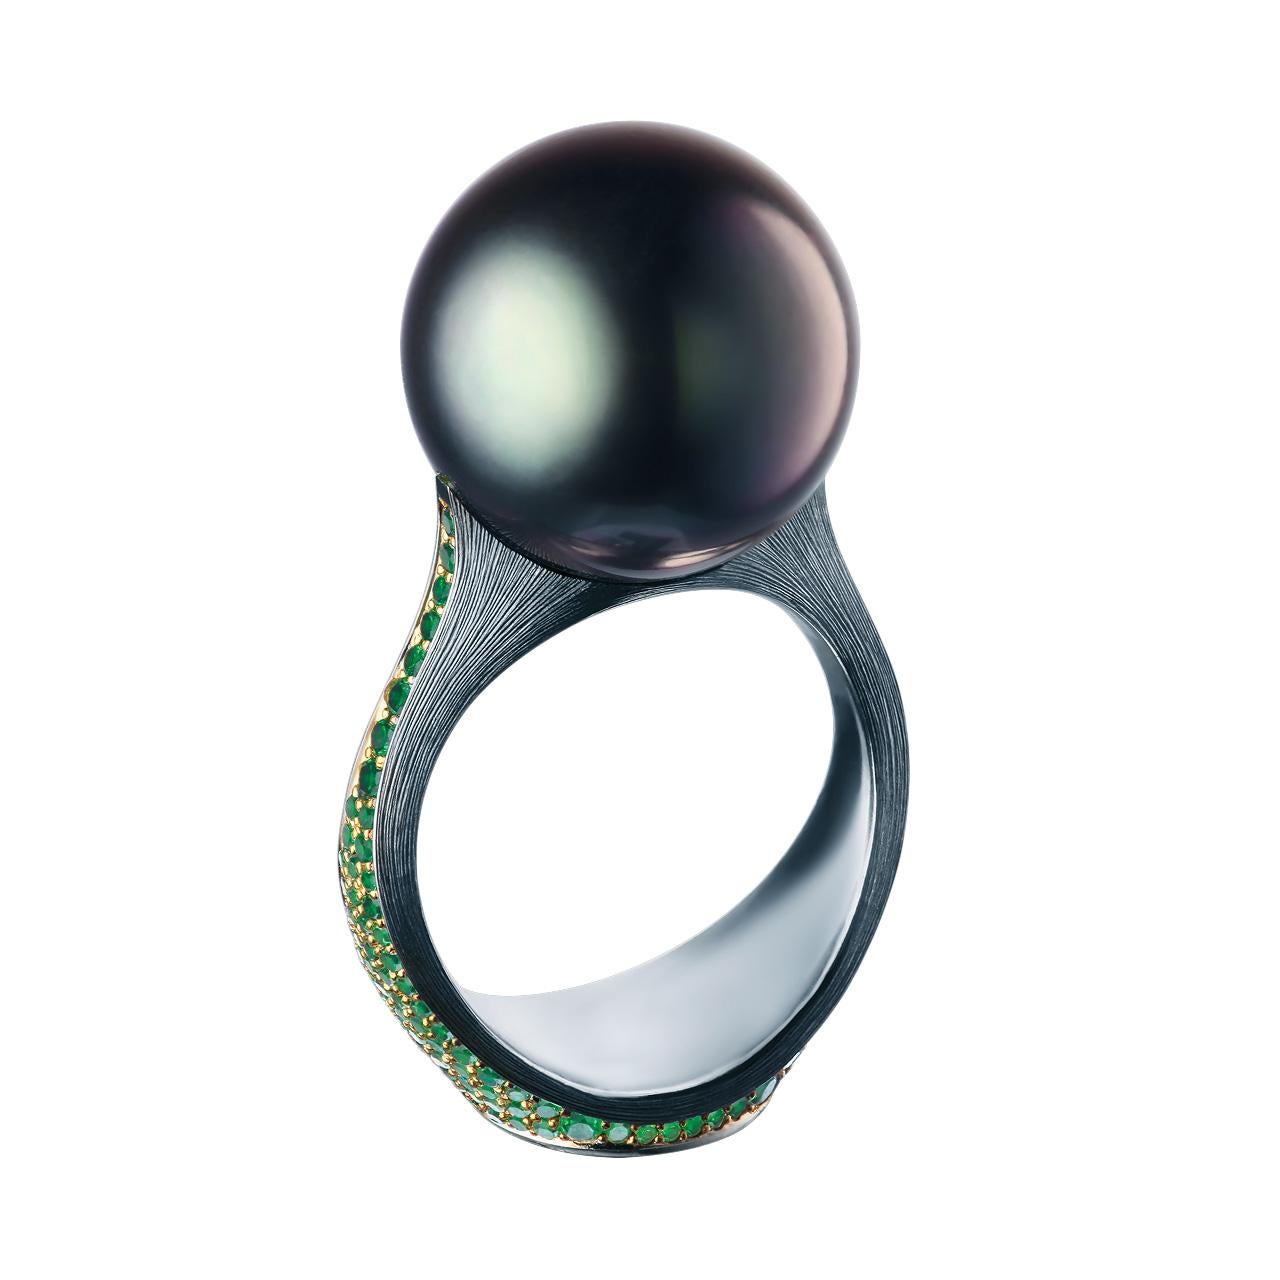 mb00009
- 20 Round Diamonds – 0.08 ct, E-F/ VVS
- 9 Round Sapphires– 0.04 ct
- 201 Round Tsavorites– 0.97 ct
- 15.3 mm Dark Tahitian pearl 
- 18K White Gold 
- Weight: 13.52 g
- Size: 16.5 mm
This elegant ring from the Pearl dreams collection of